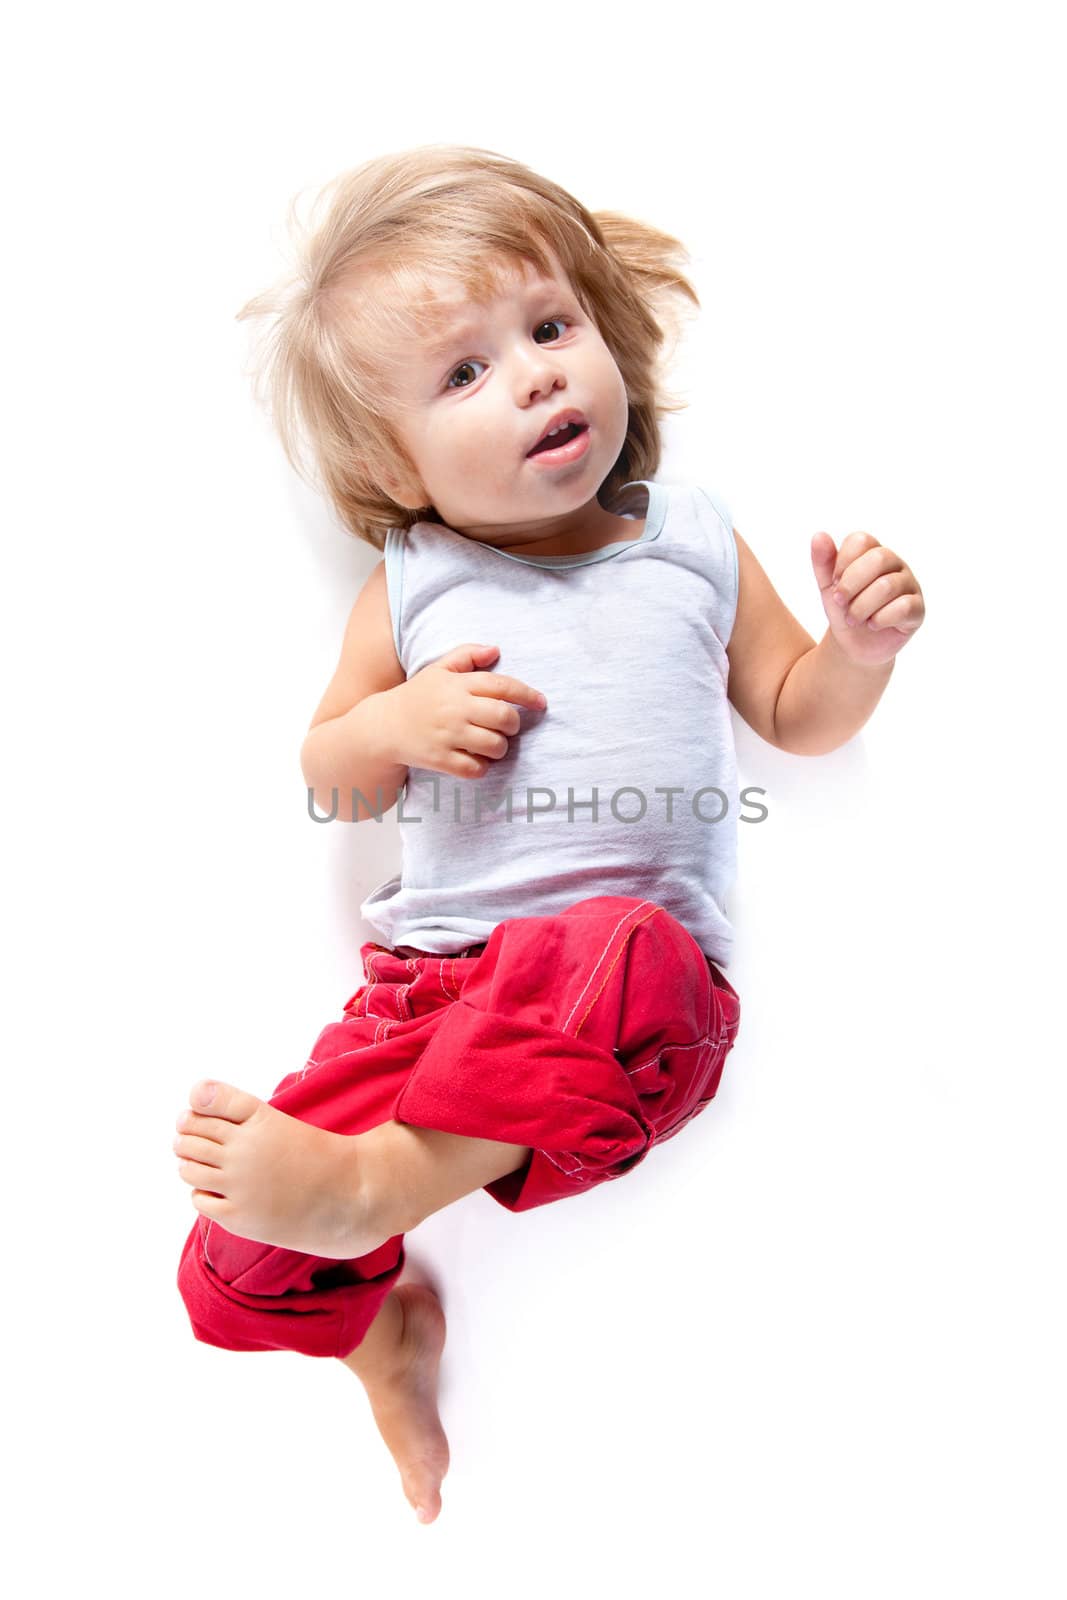 Funny boy in red pants, high angle view, isolated on white background 